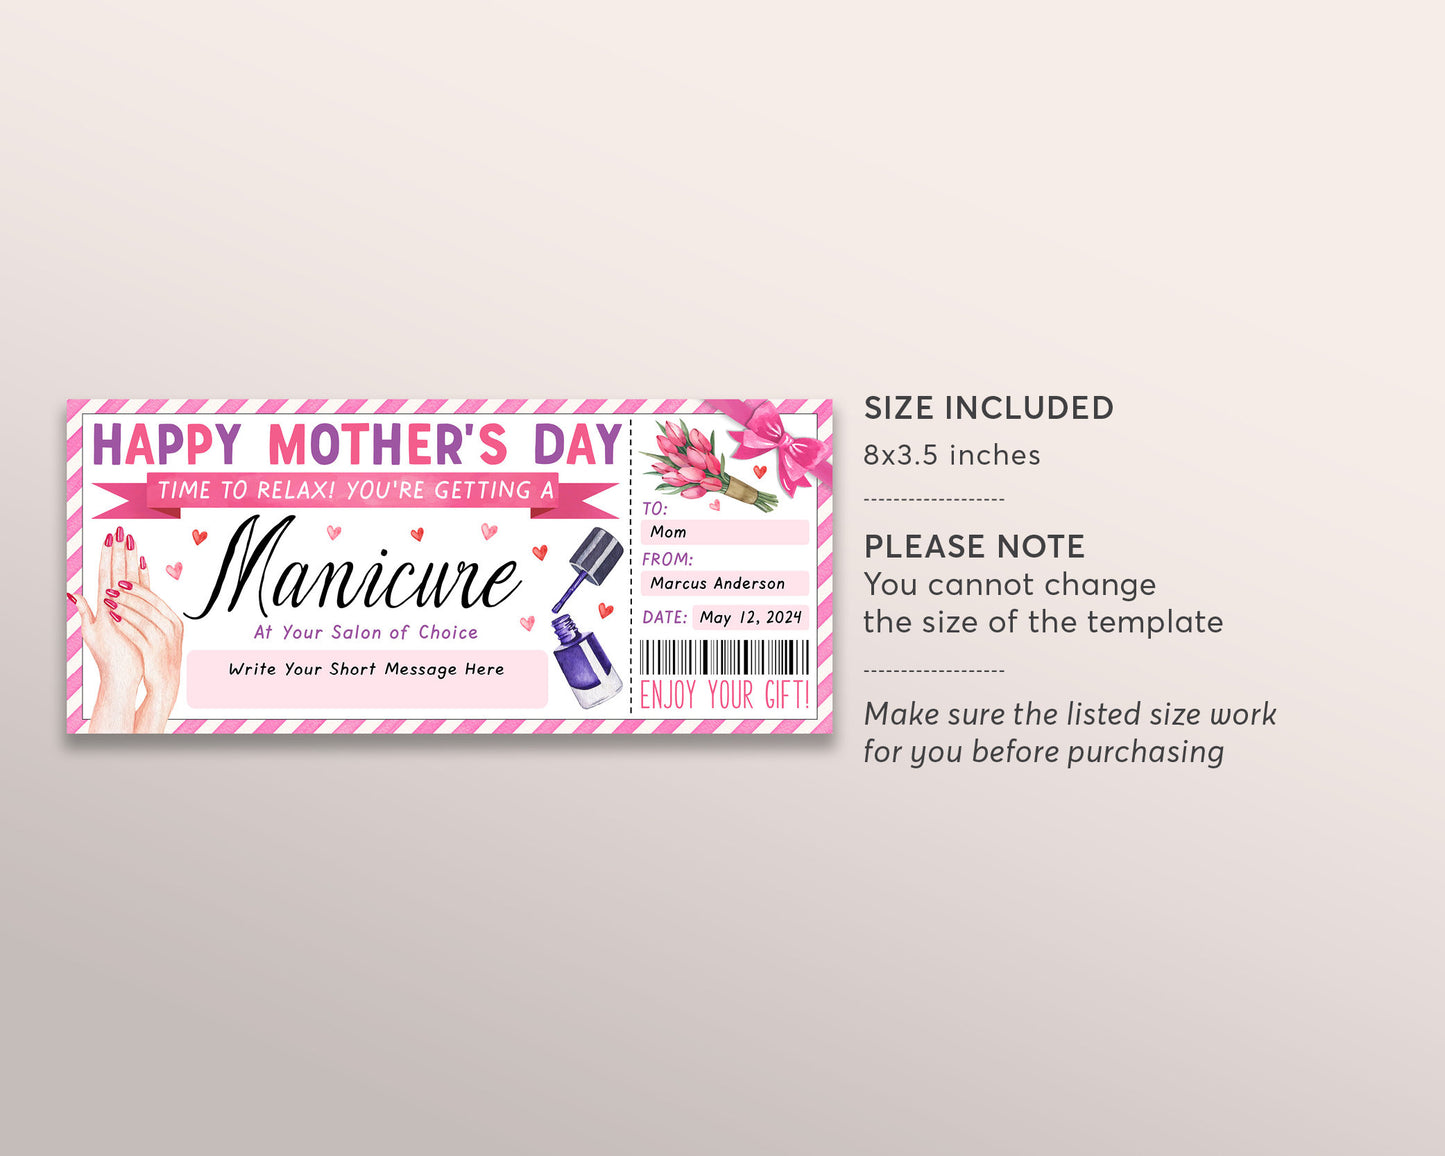 Mothers Day Manicure Ticket Editable Template, Birthday Surprise Mani Pedi Gift Certificate For Mom, Nail Salon Spa Voucher Coupon Reveal